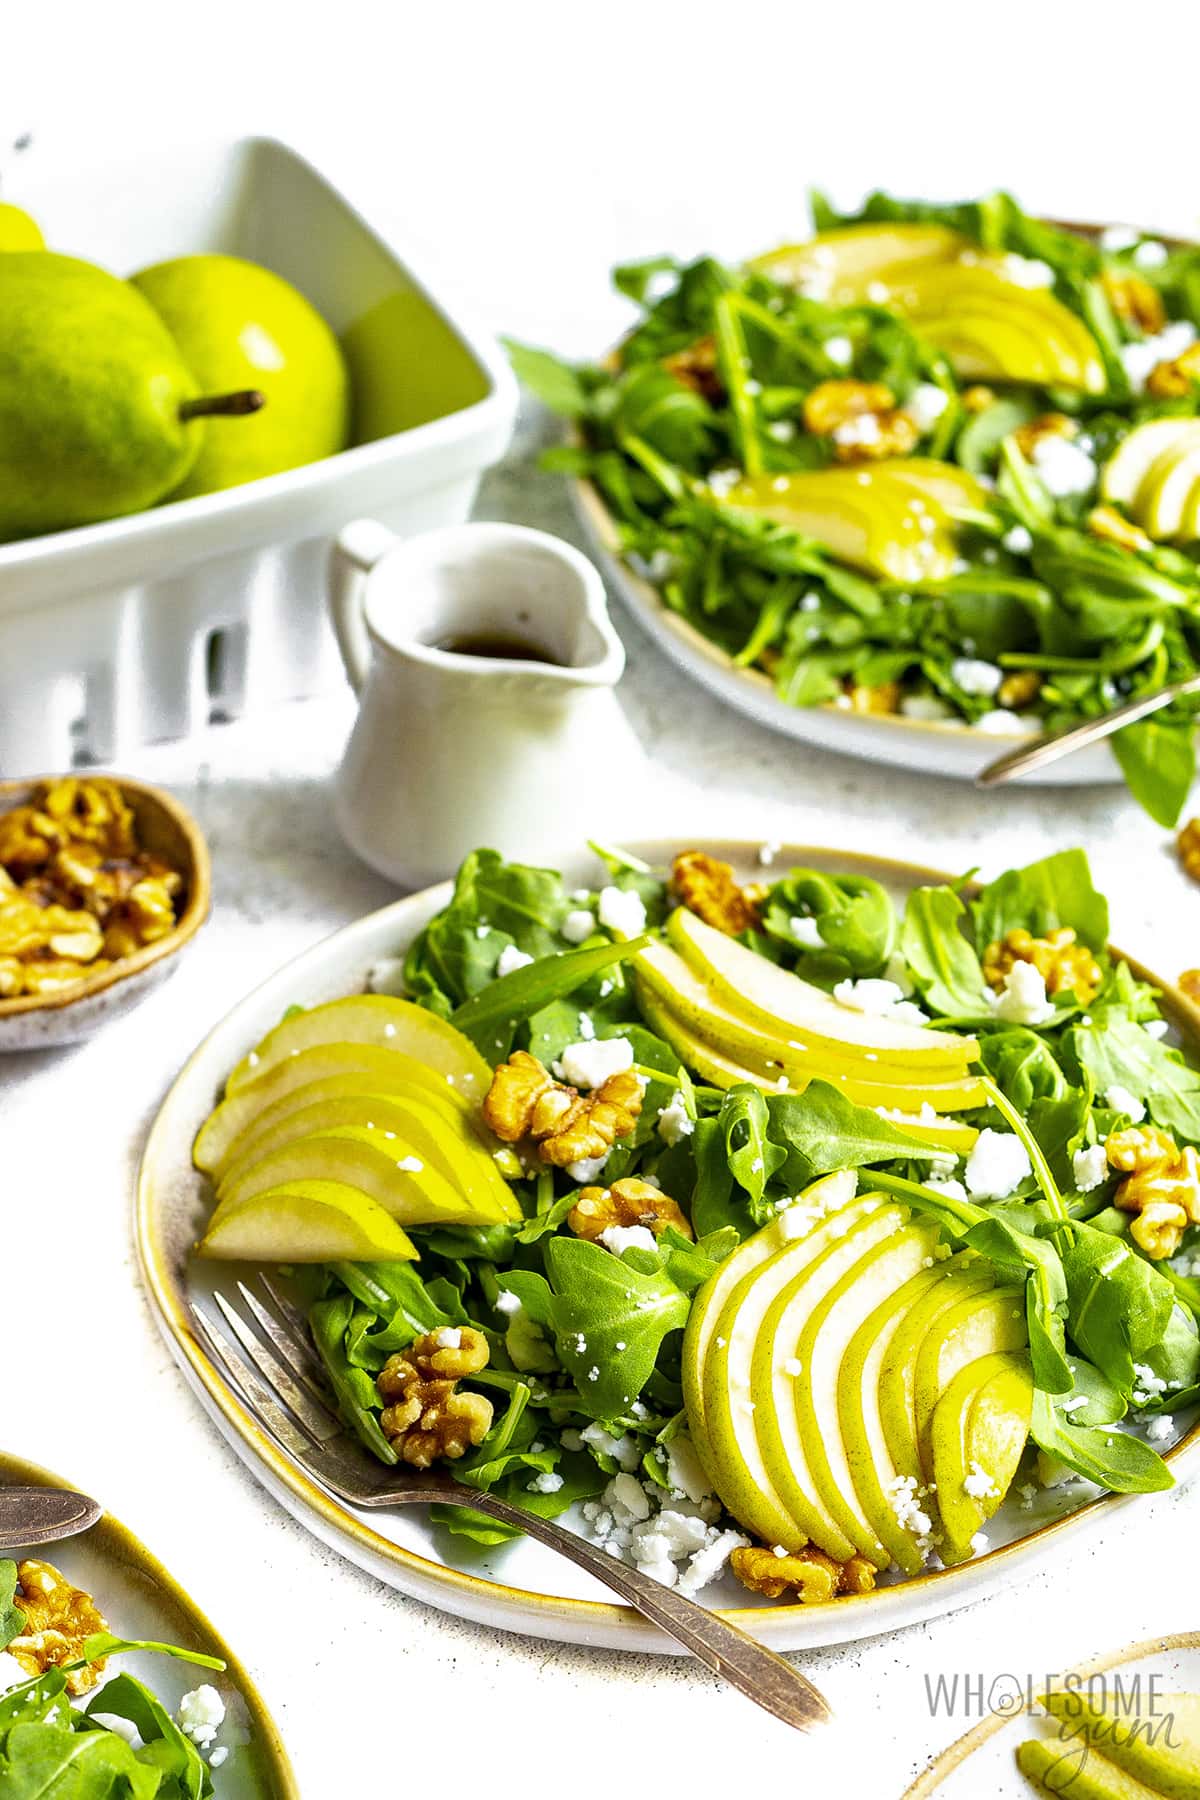 Salad with pears, with dressing and more pears in the background.